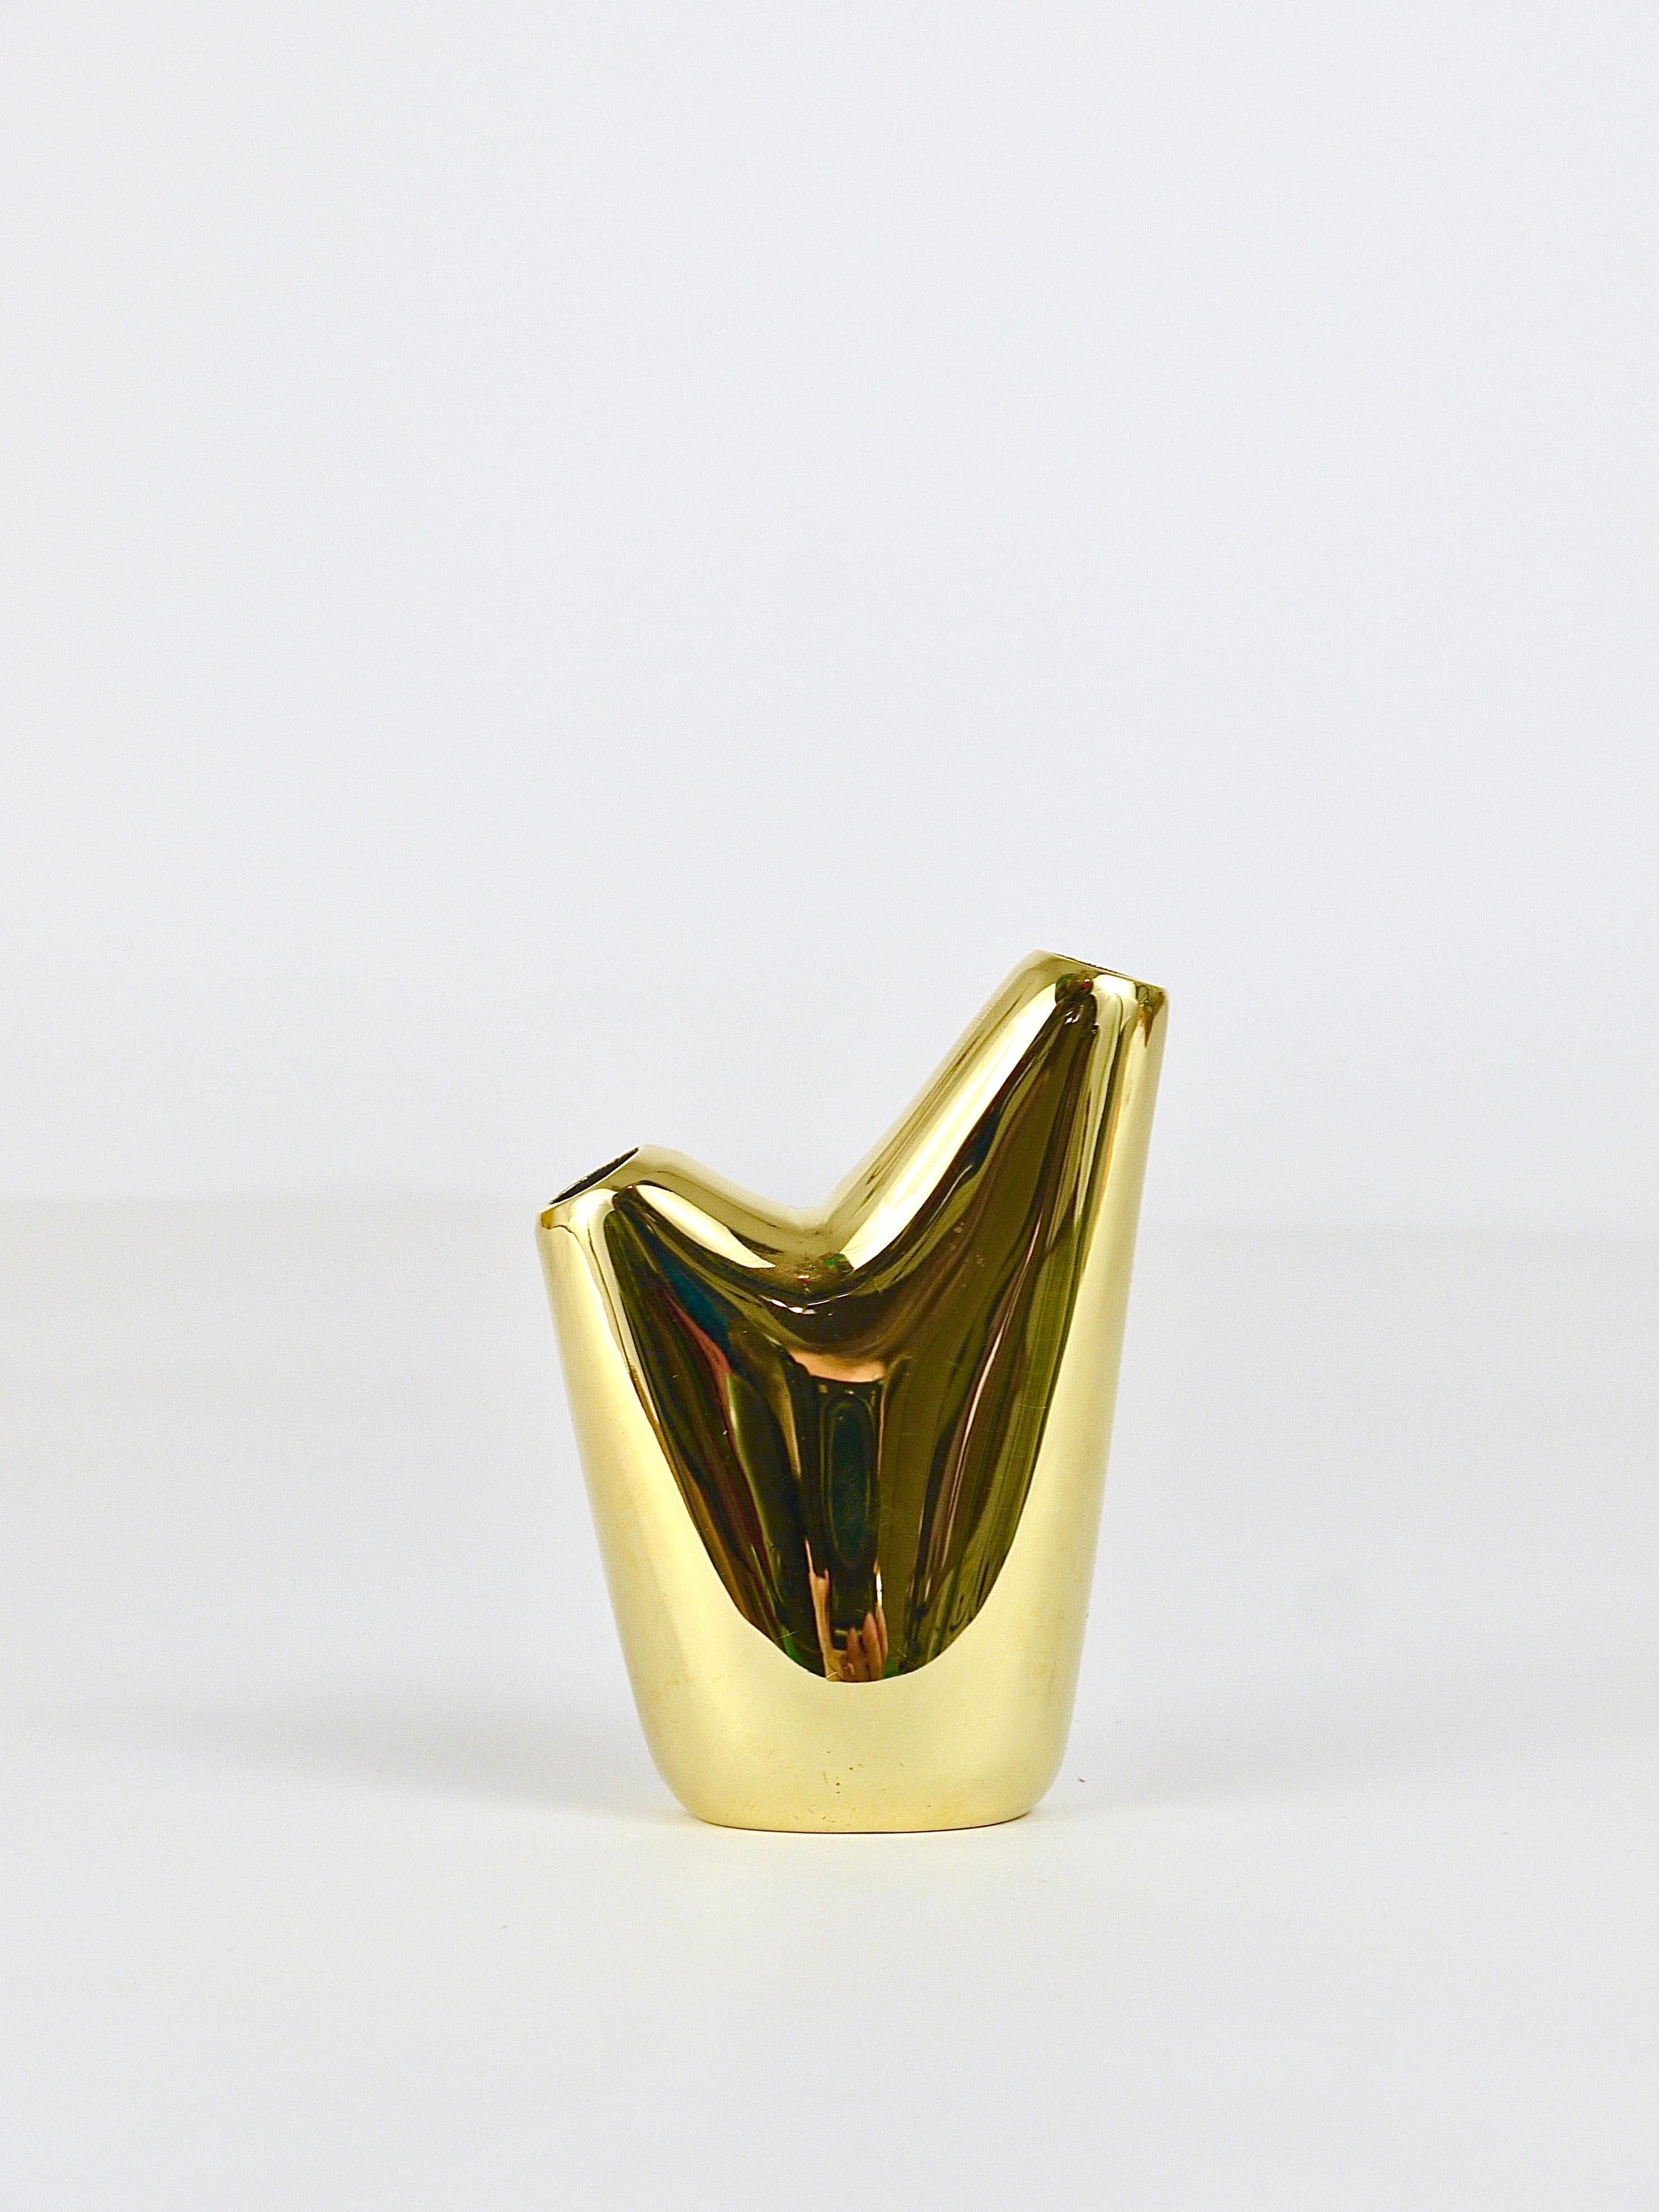 A beautiful organic flower vase, model #3974, designed by Carl Aubock II in 1950. Executed by Werkstätte Auböck in Vienna / Austria. Handmade of brass, this is the fully mirror-polished version, not the more common black patinated one. Fully marked.